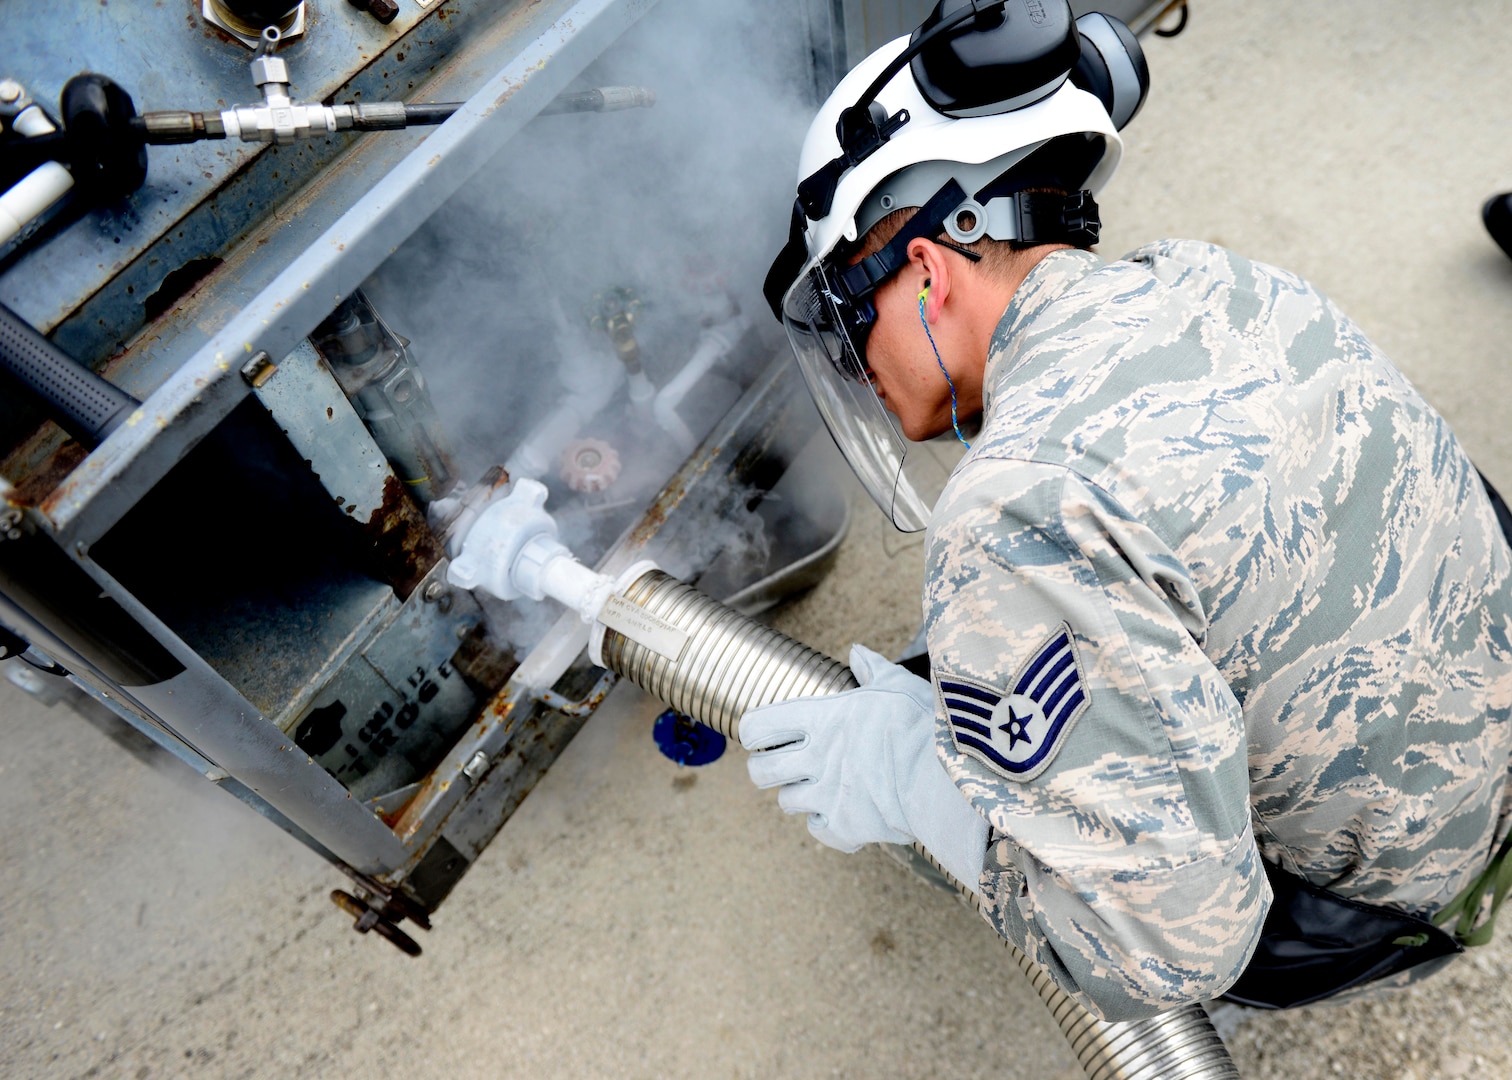 Staff Sgt. Chantz Wyant, 31st Logistics Readiness Squadron fuels facility supervisor, fills a liquid nitrogen cart, Aug. 10, 2016, at Aviano Air Base, Italy. Cryogenics Airmen fill an average of 1,200 gallons of liquid oxygen and 1,200 gallons of liquid nitrogen monthly. (U.S. Air Force photo by Senior Airman Areca T. Bell/Released)